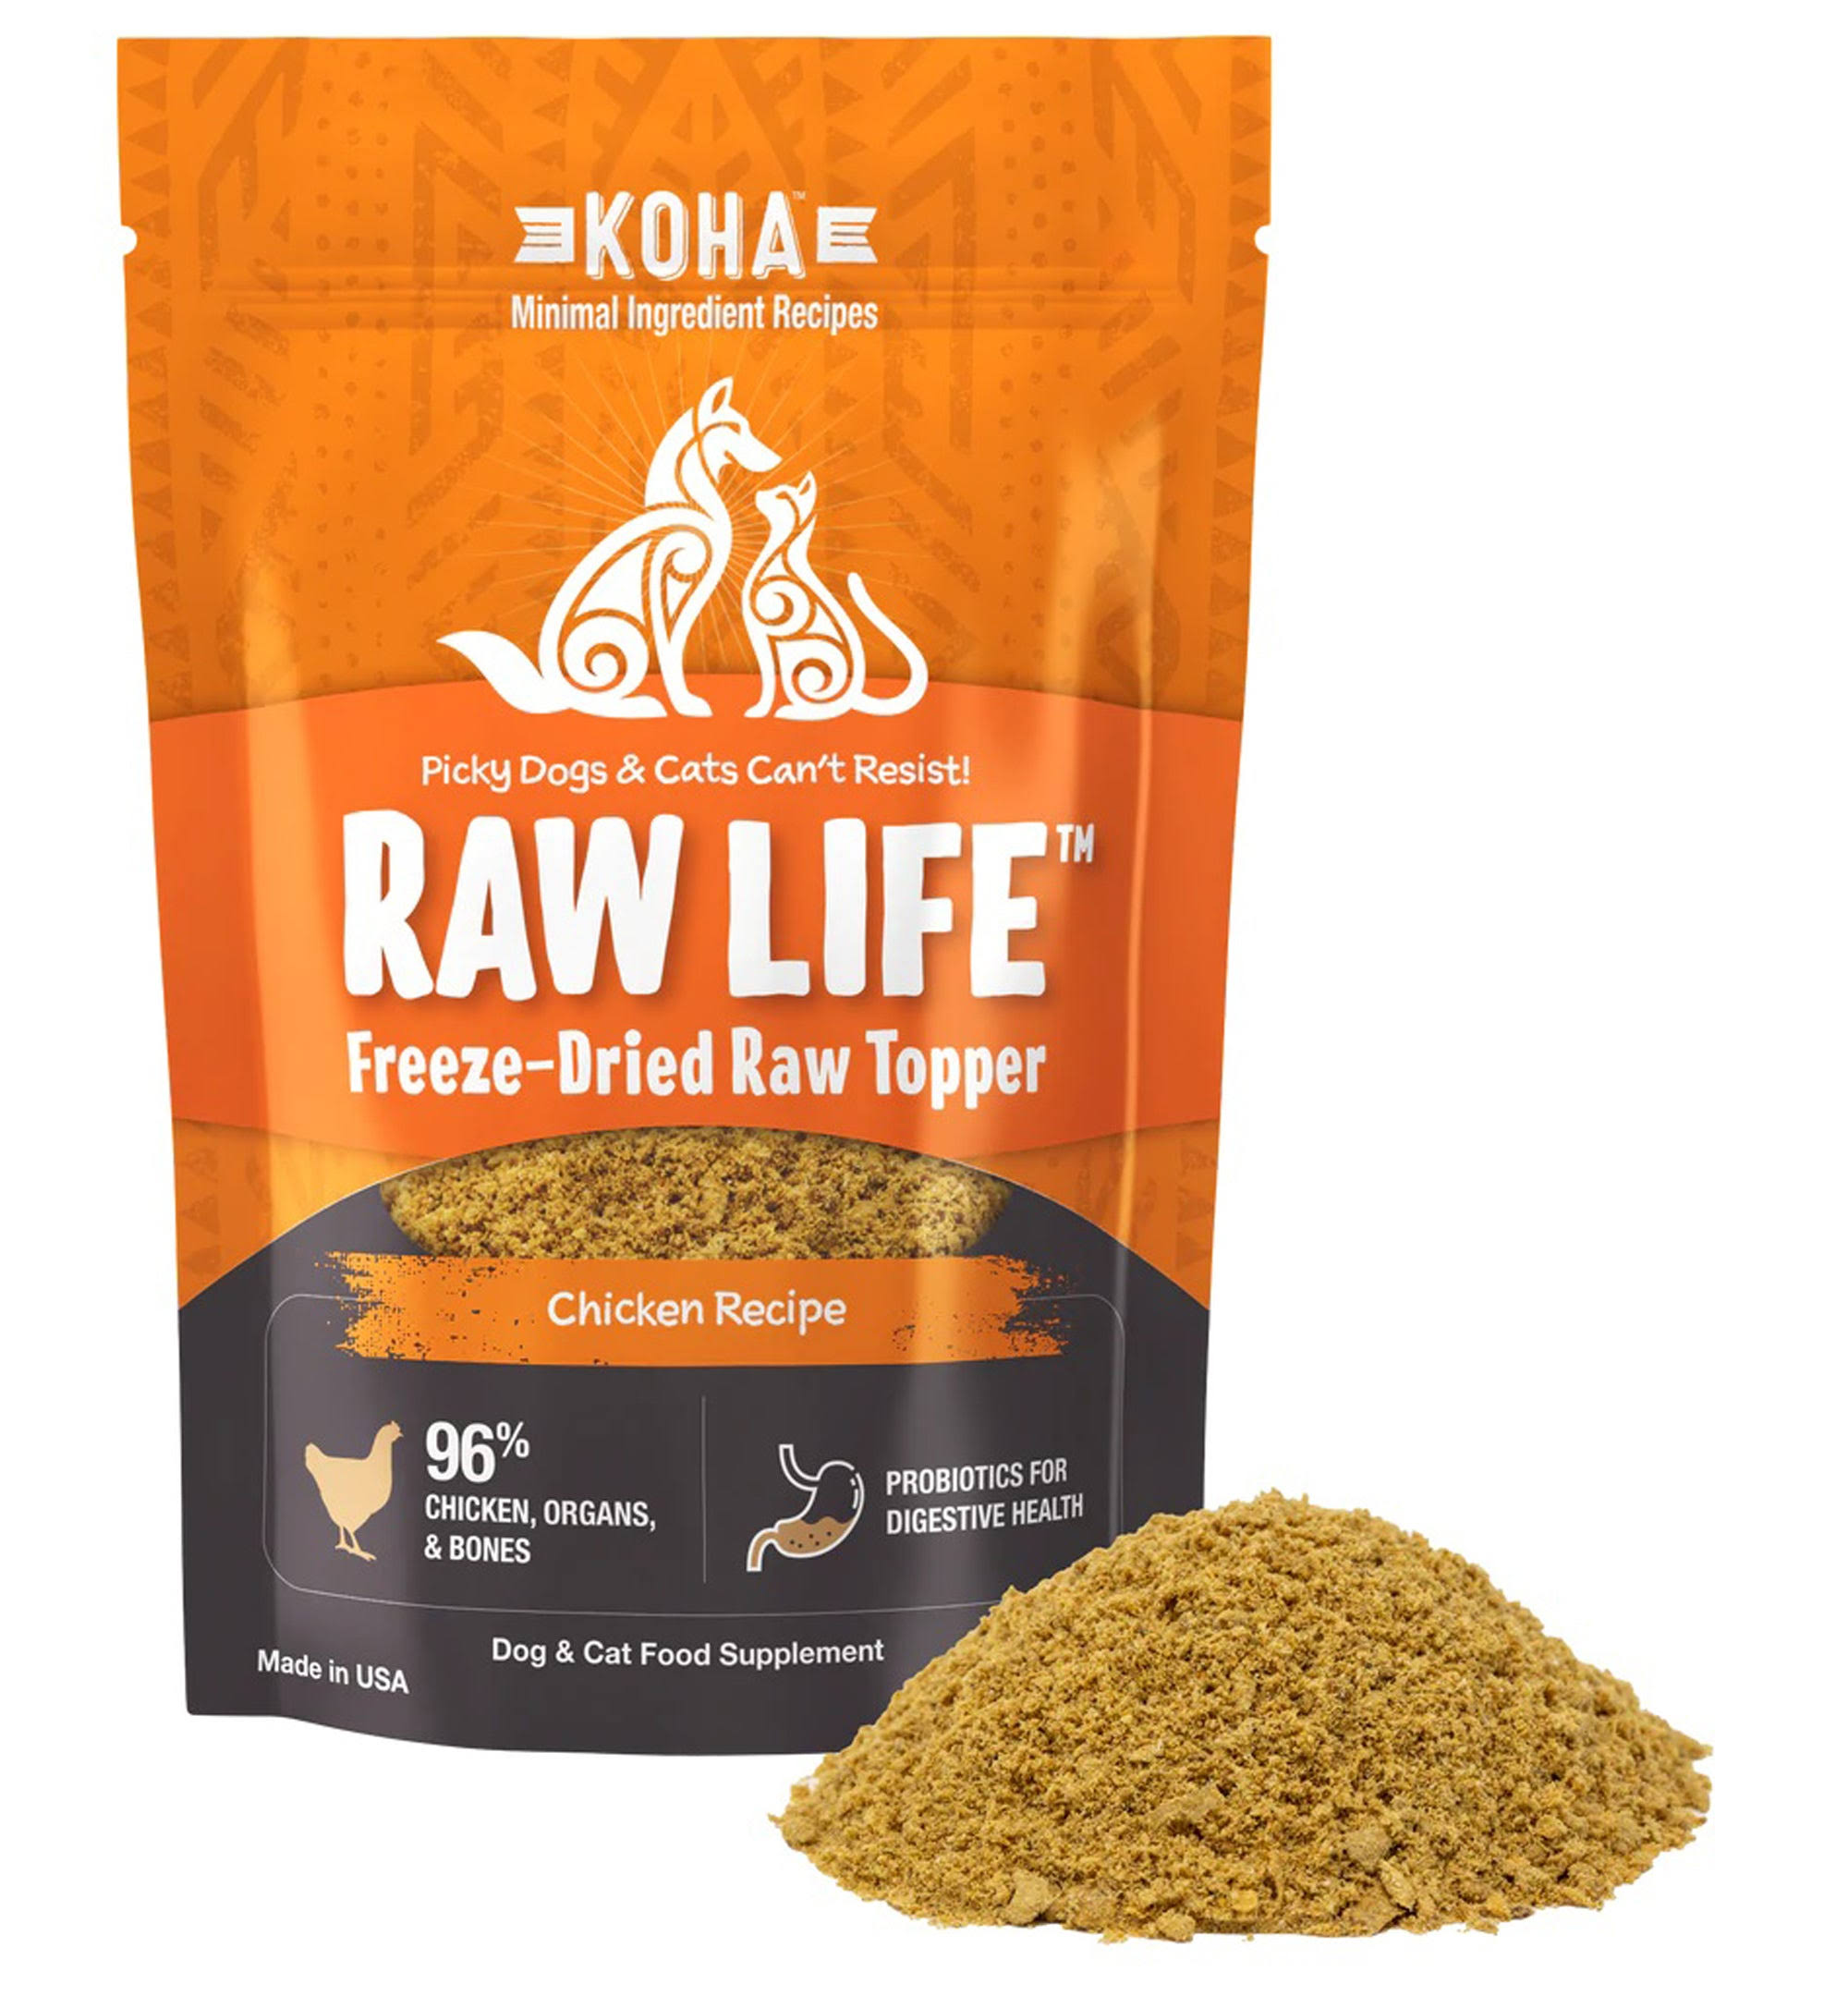 Koha Freeze-Dried Raw Topper Chicken Recipe for Dogs and Cats 8oz